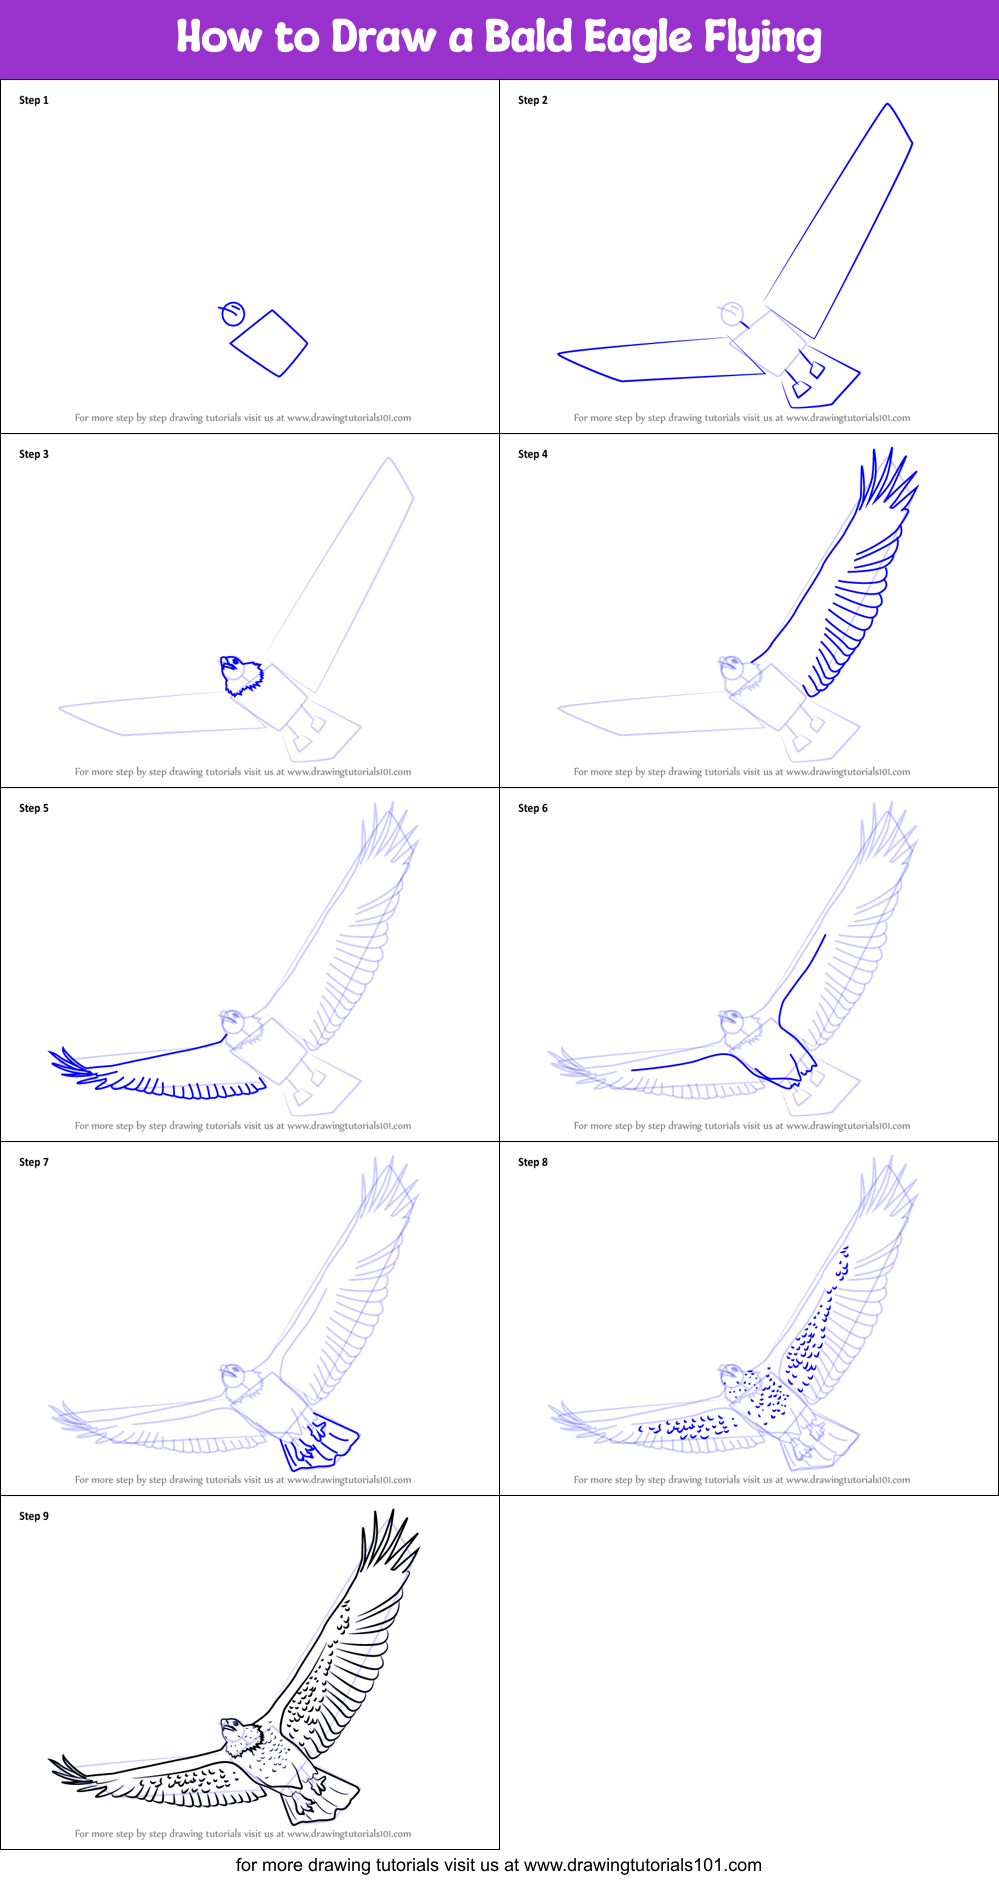 How to Draw a Bald Eagle Flying printable step by step